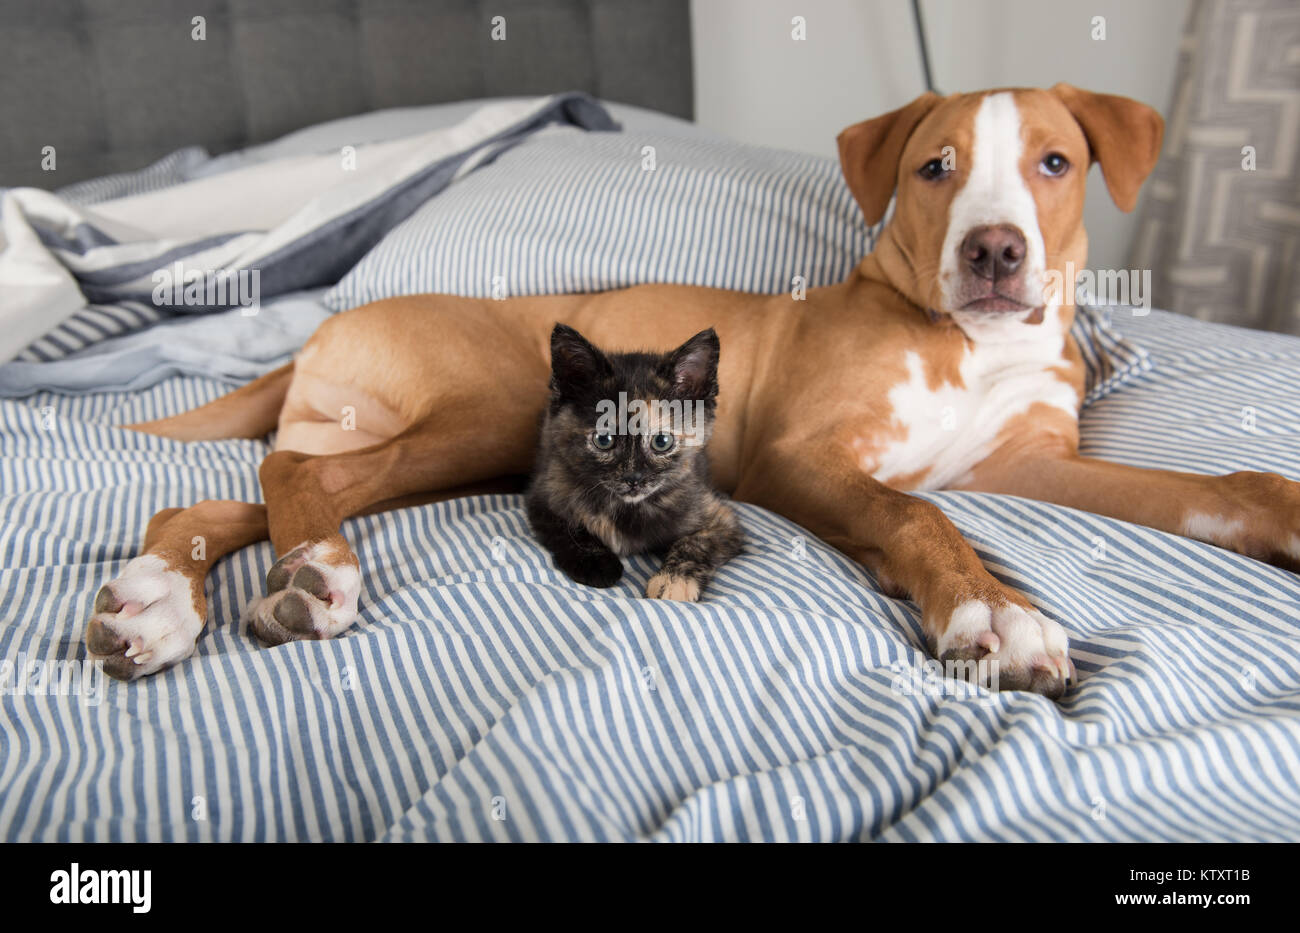 Tiny Adorable Tortoise Shell Kitten Relaxing on Striped Bed with Dog Friend Stock Photo